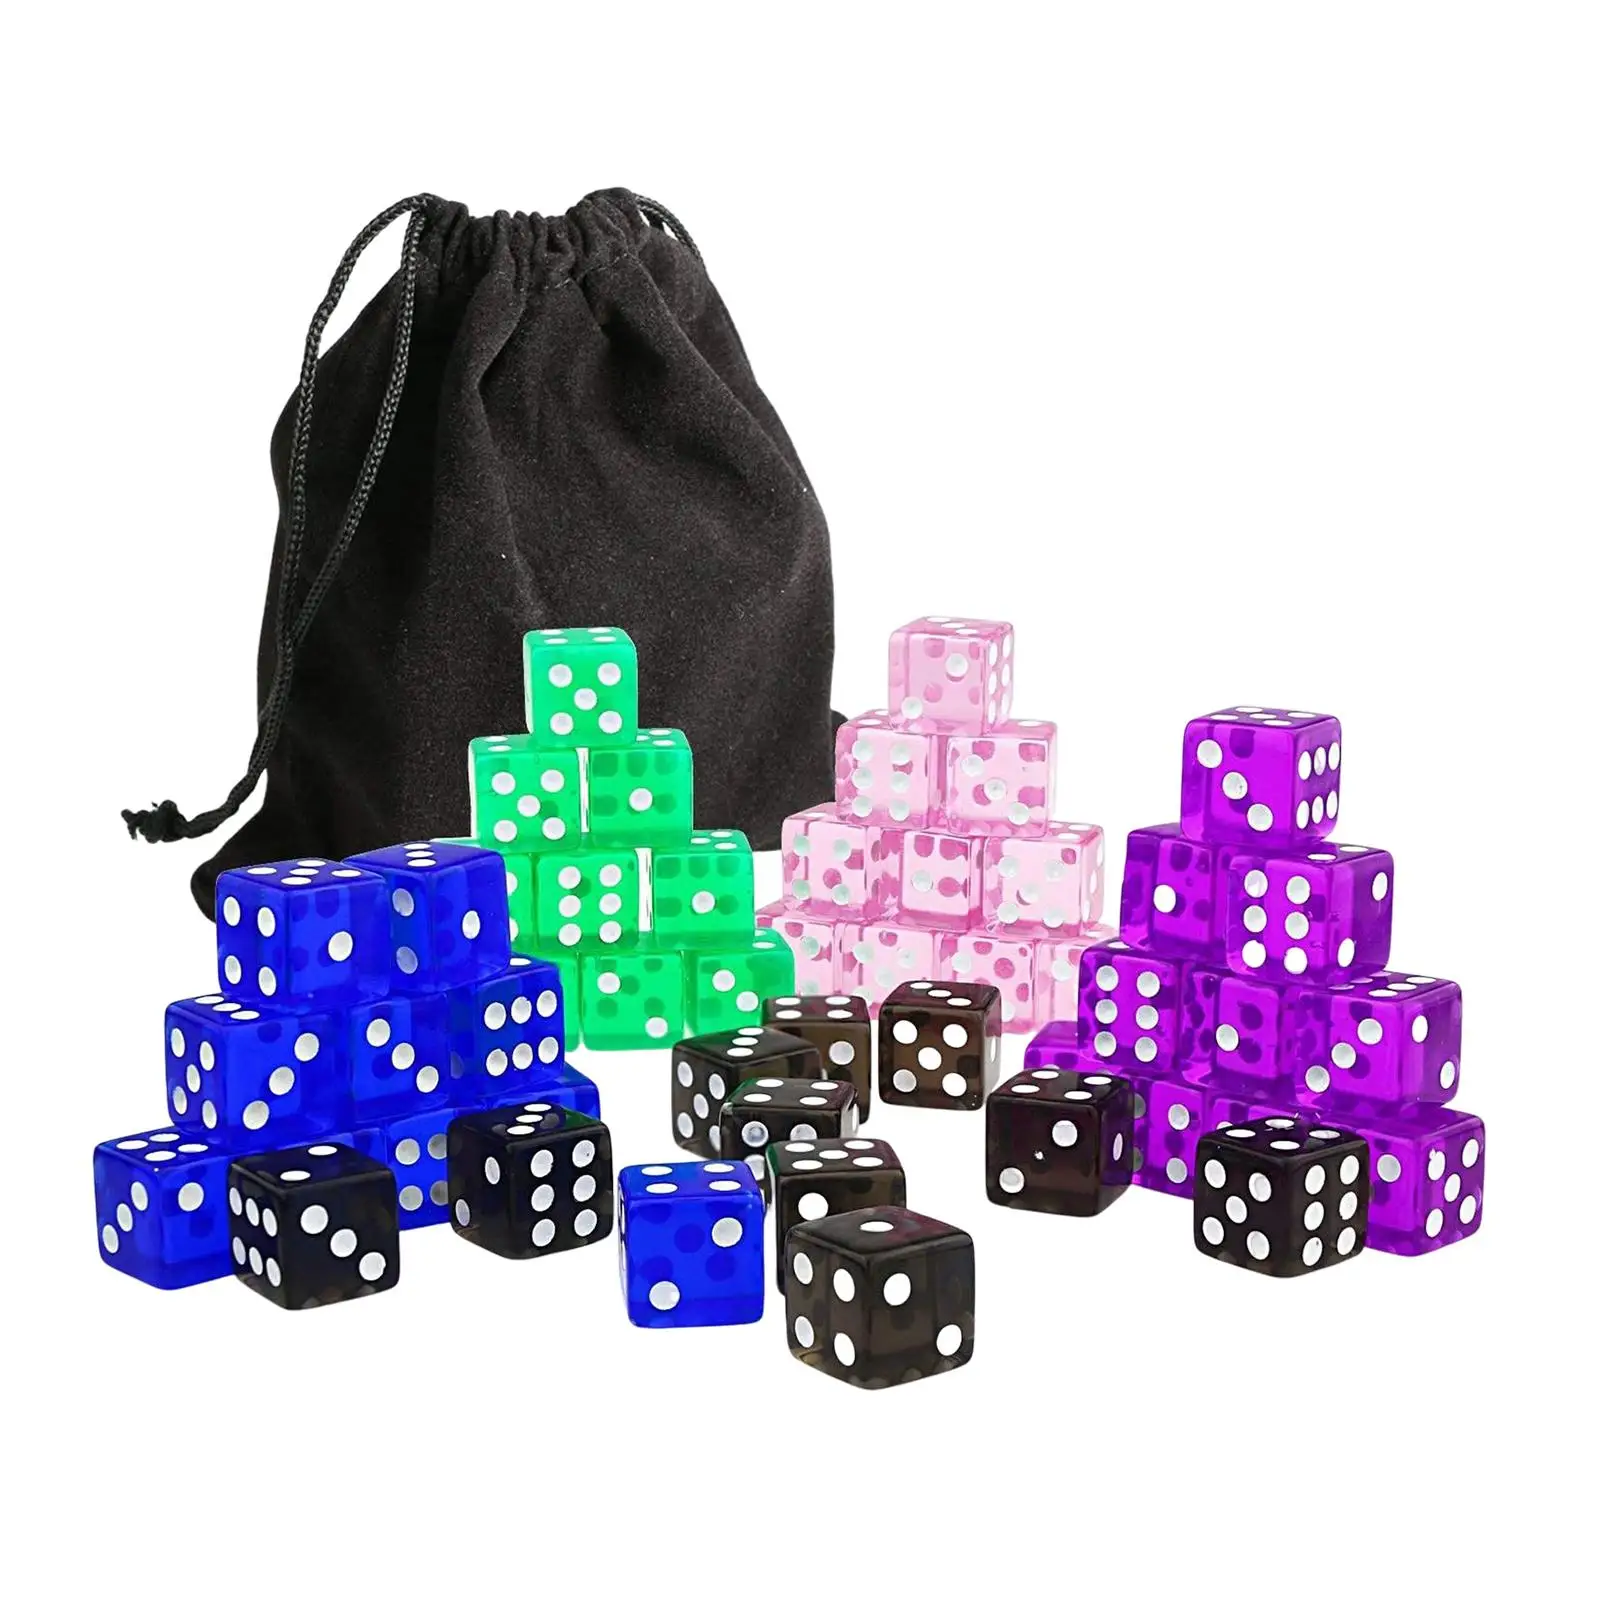 6 Sided Dices, Role Playing Game Dices, Entertainment Toy for Table Game